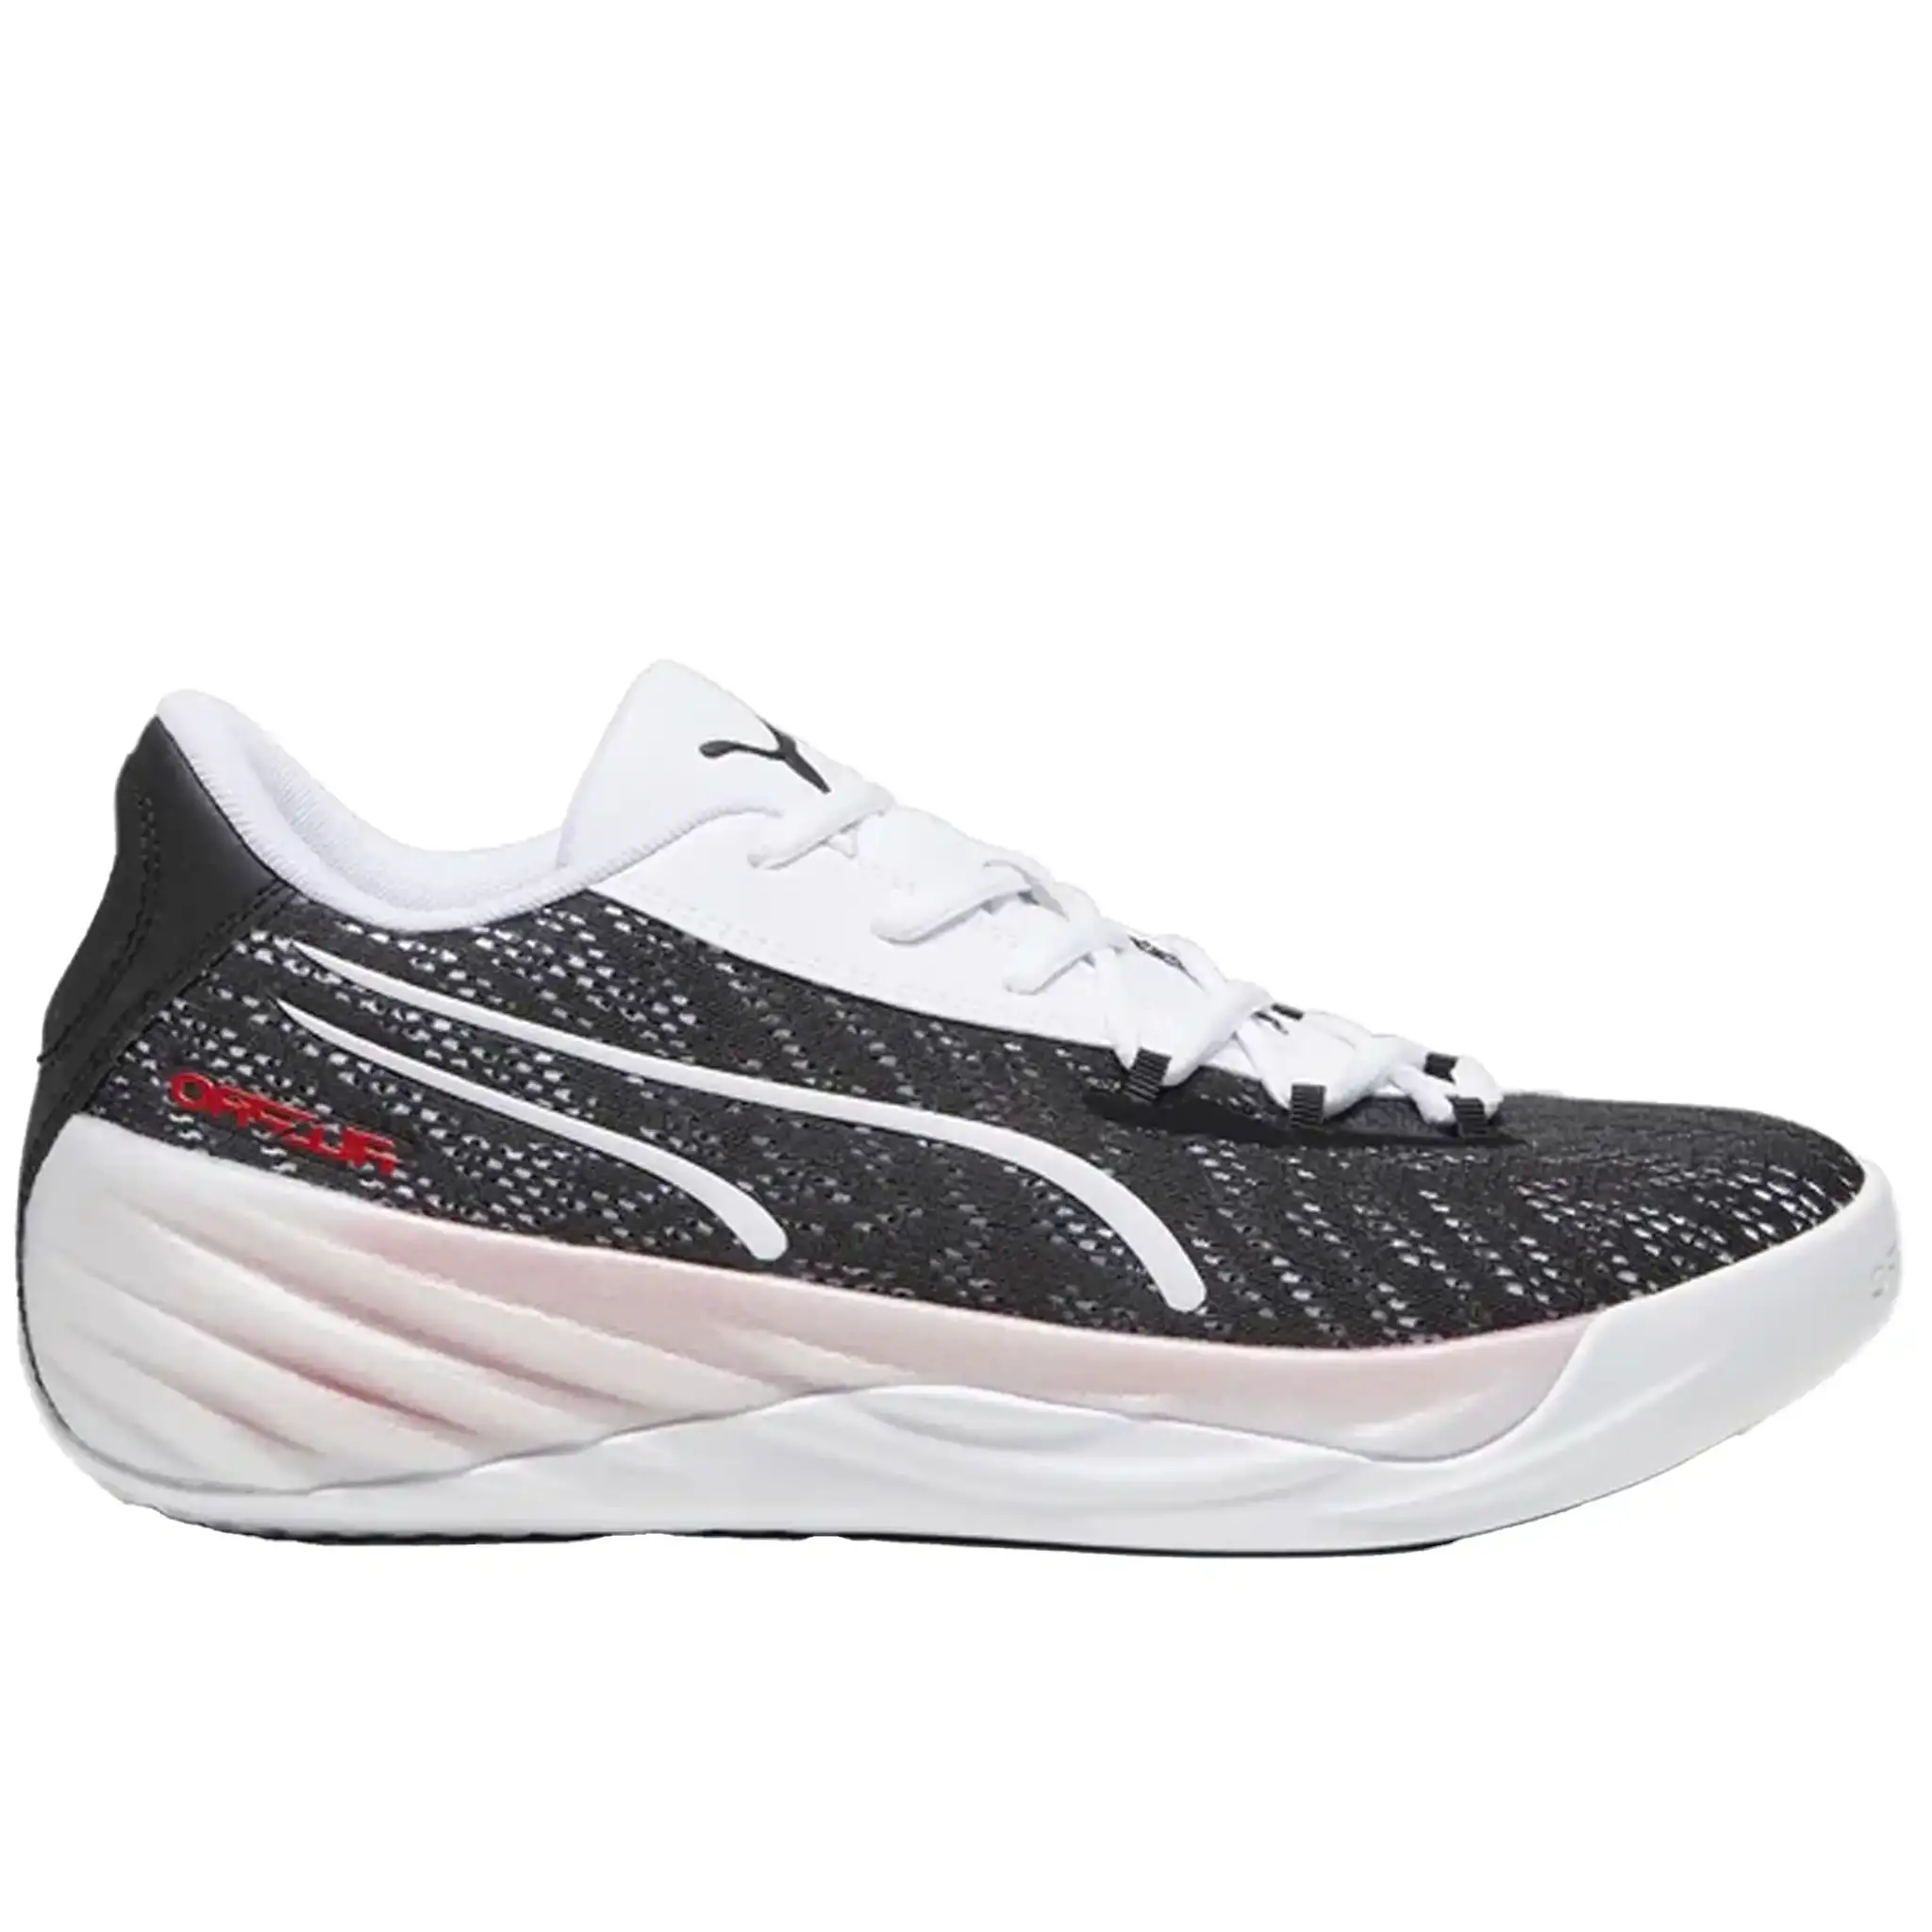 Puma All Pro Nitro Black Lime Squeeze 378541-02-Black Lime Squeeze